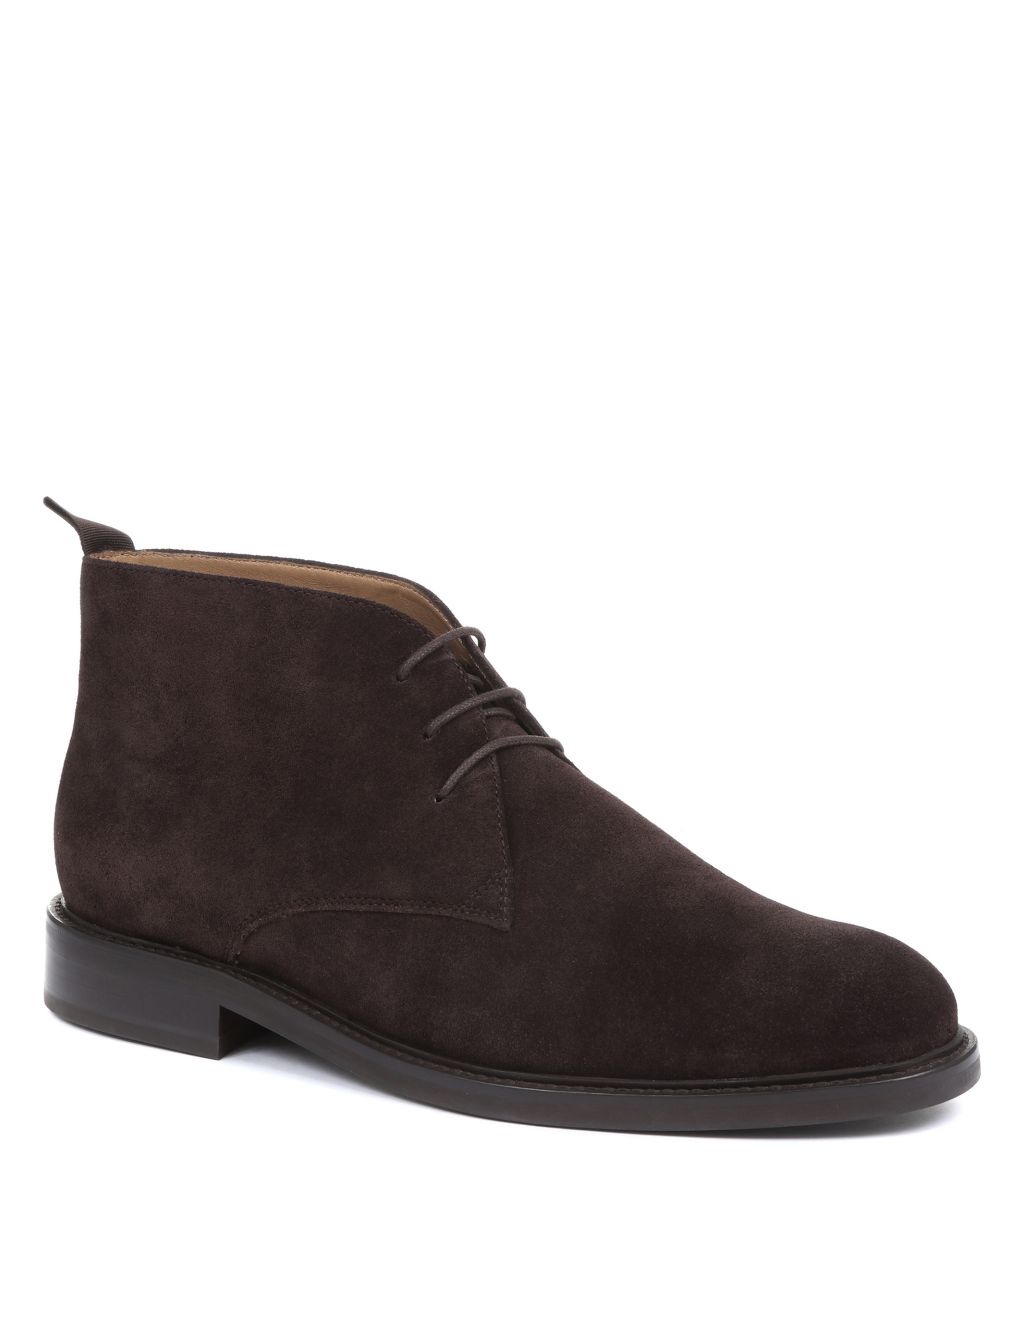 Suede Pull-on Chukka Boots image 2